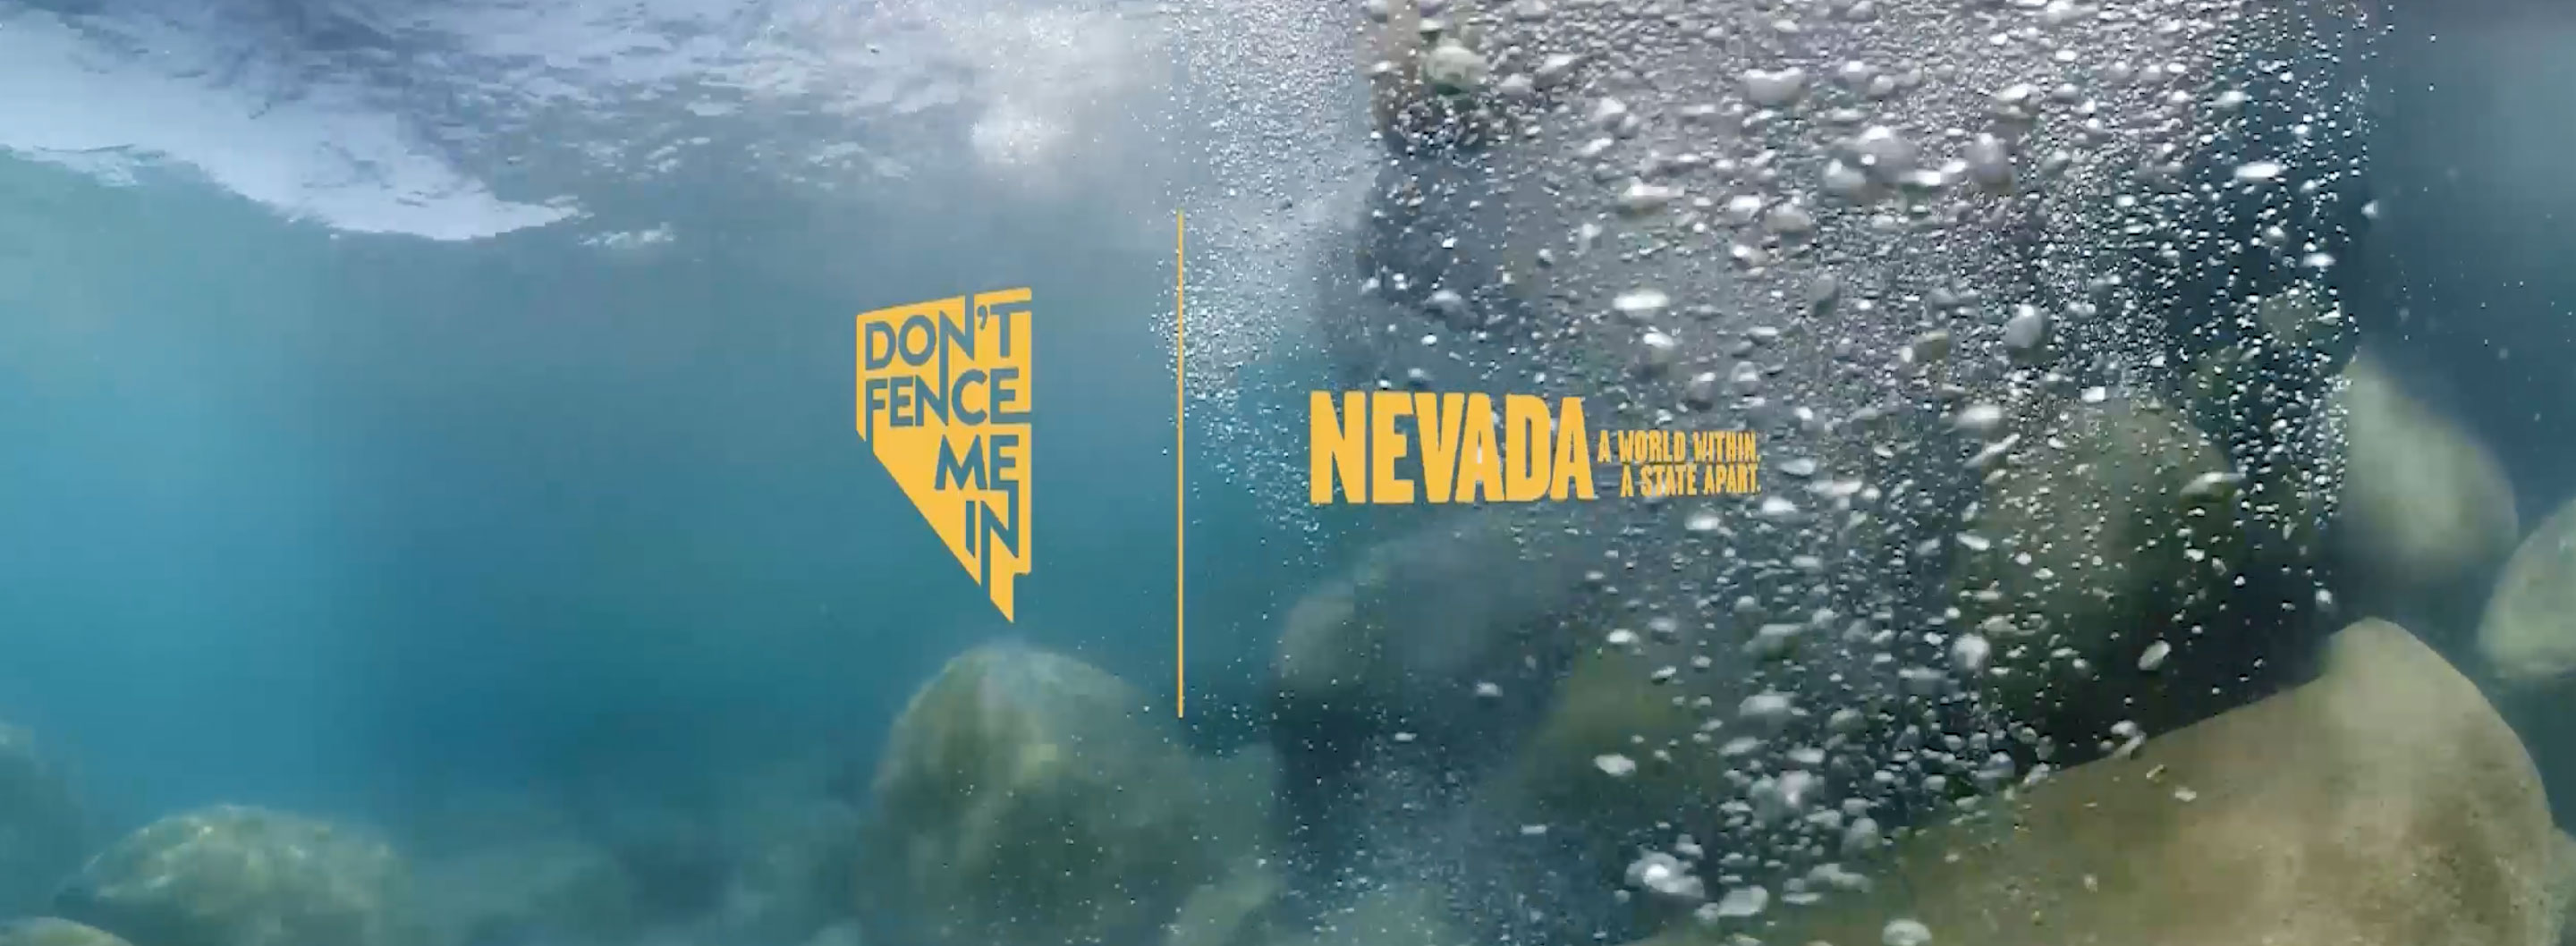 TravelNevada.com Launches 360-Degree Video "Don't Fence Me In" VR Tour